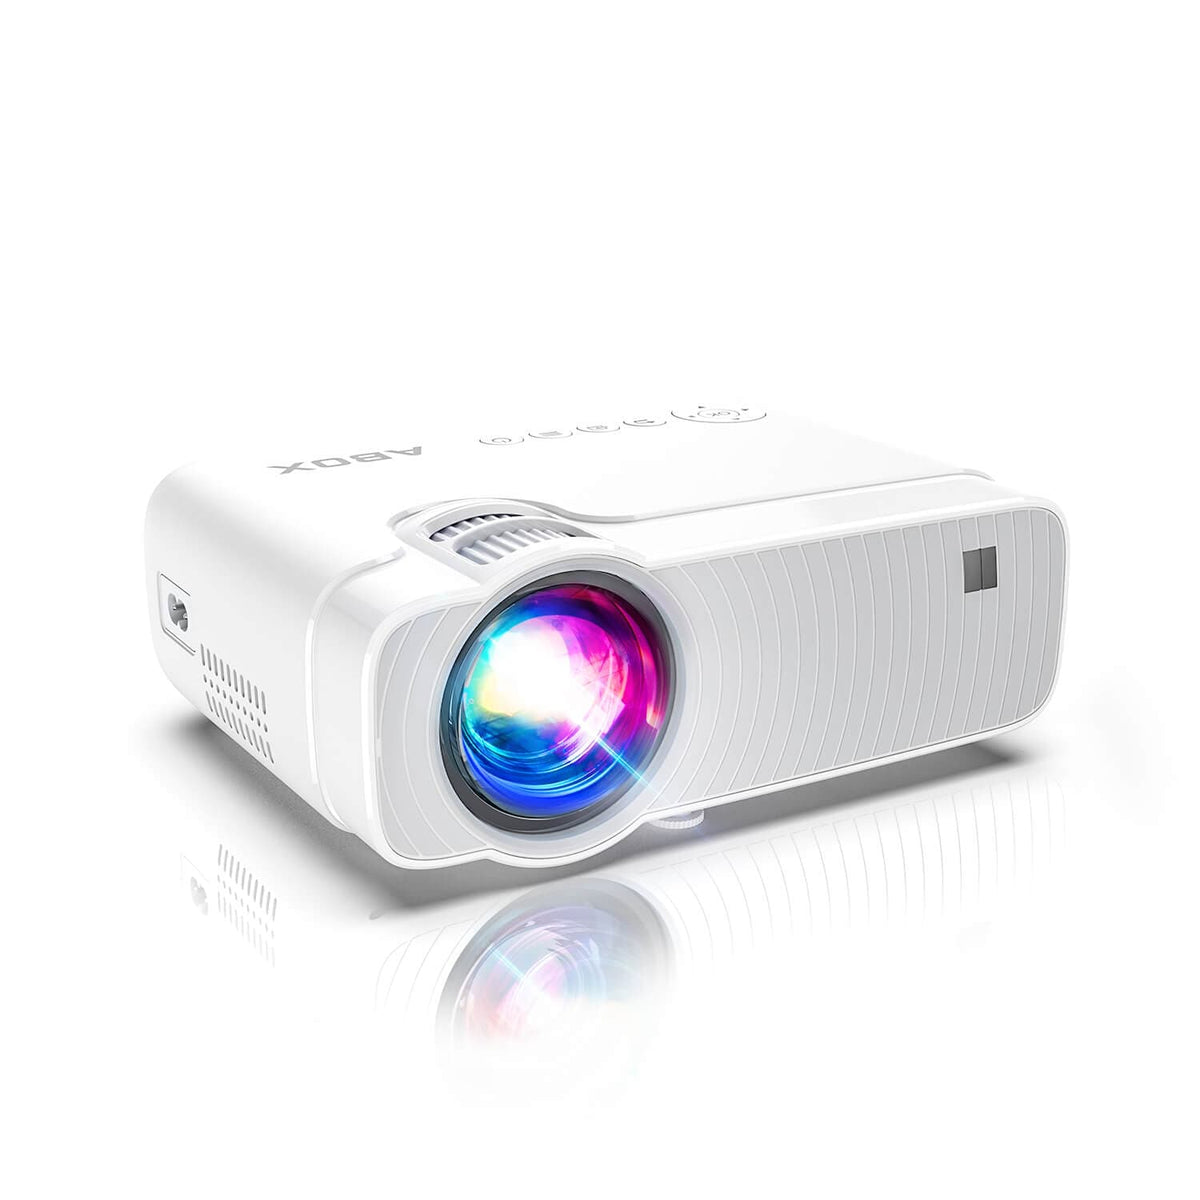 BOMAKER GC357 Portable WiFi Mini Outdoor Projector,  Outdoor Movie &amp; Home Theater Projectors - Bomaker